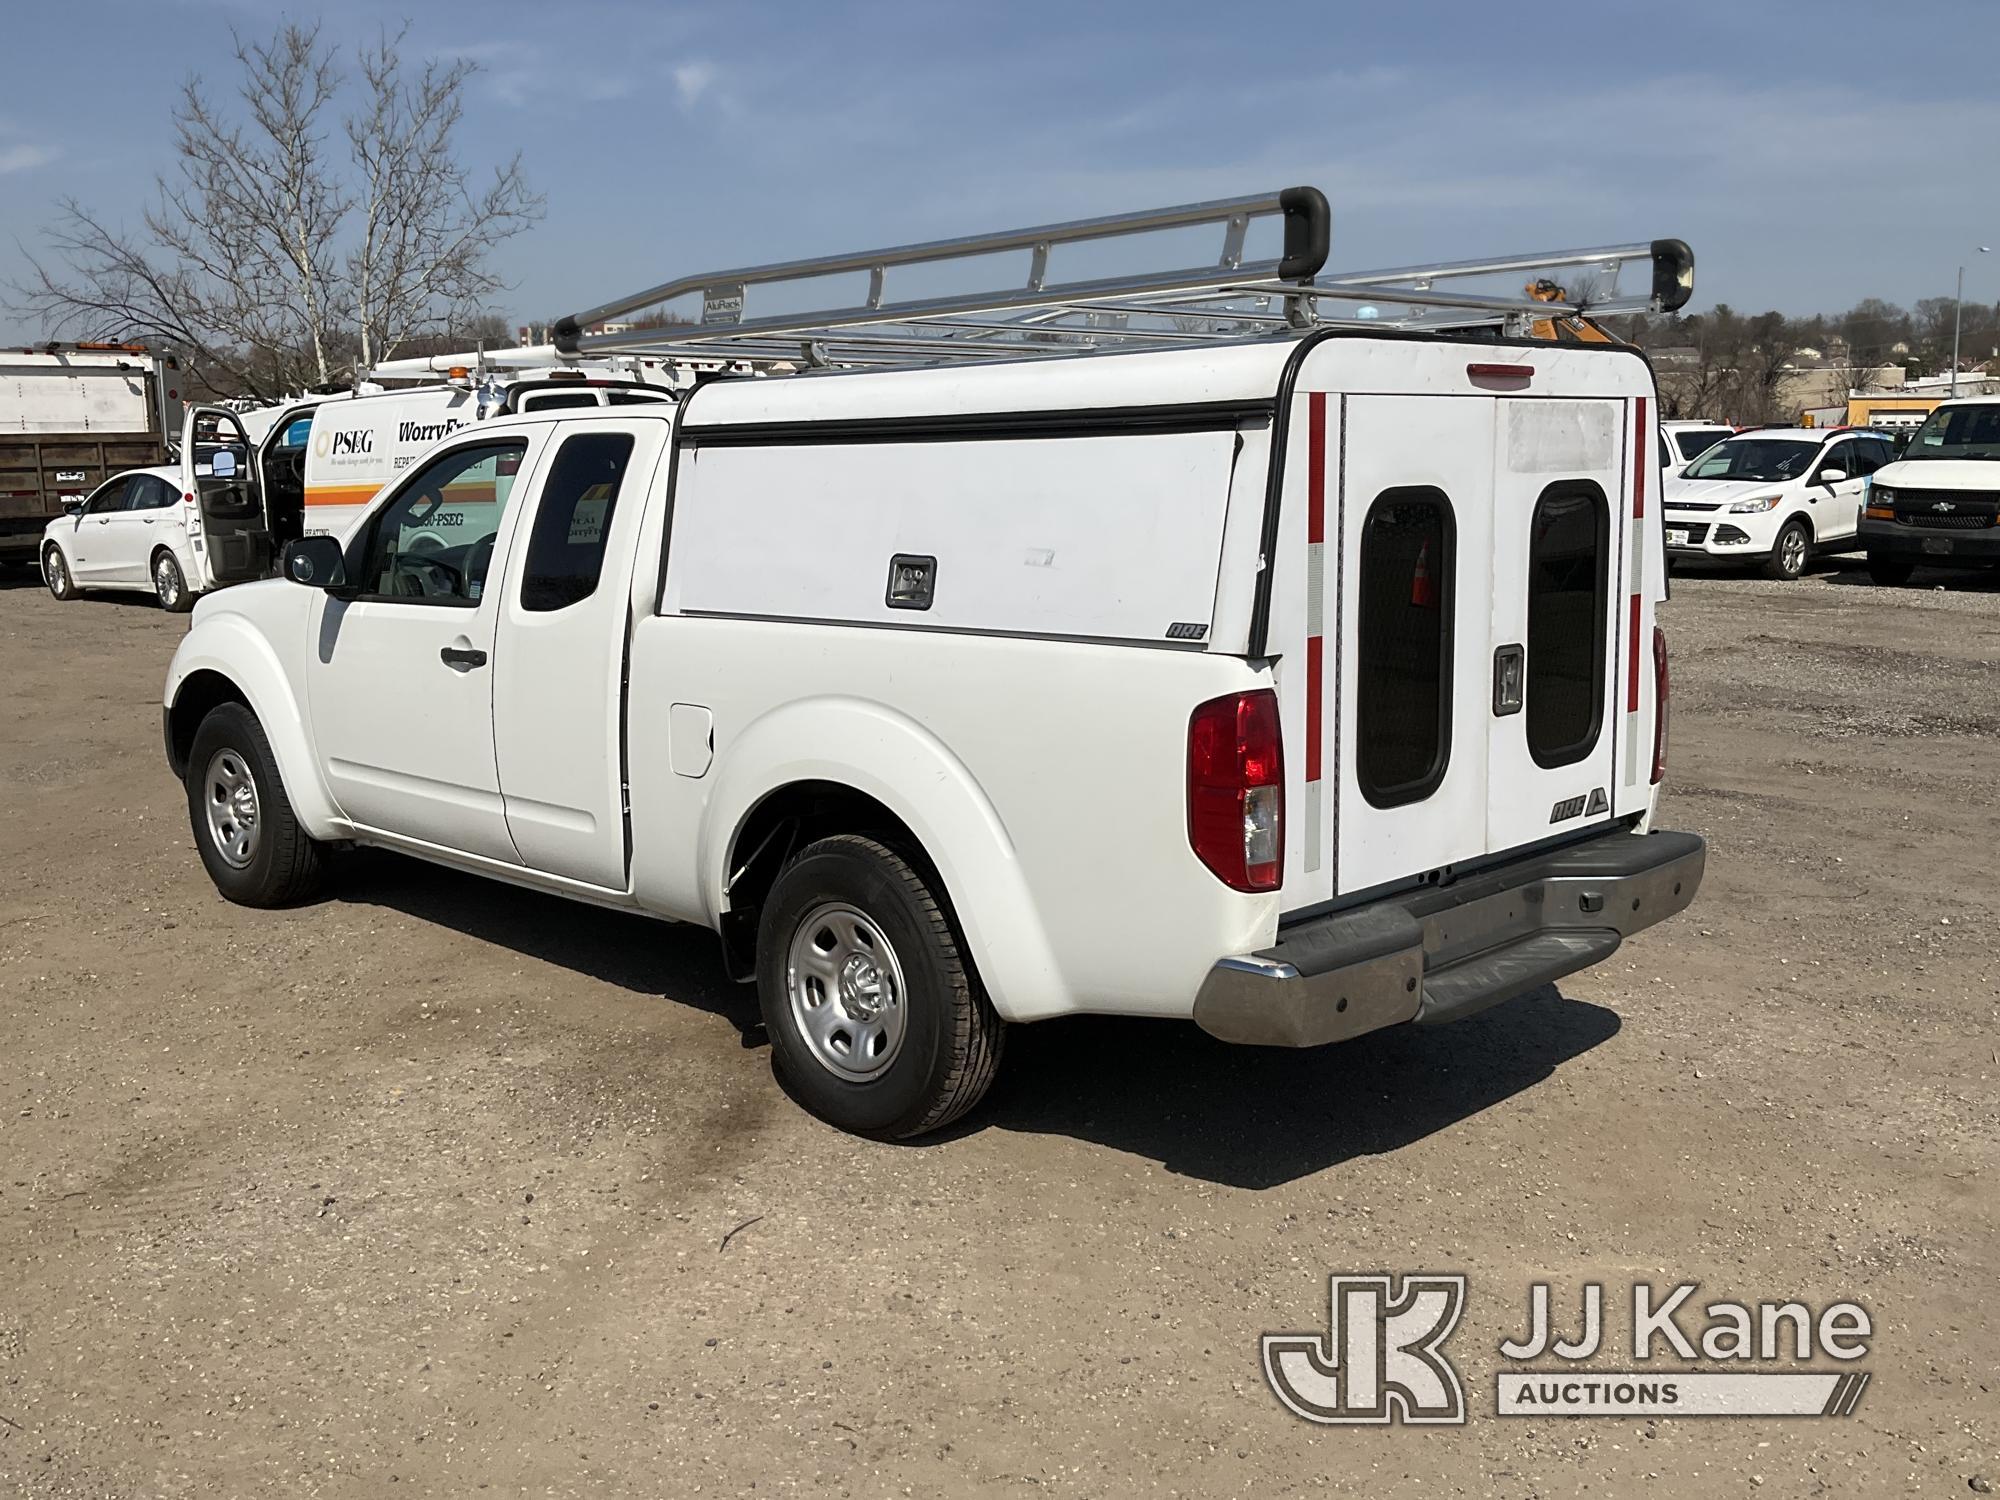 (Plymouth Meeting, PA) 2016 Nissan Frontier Extended-Cab Pickup Truck Not Running, Condition Unknown